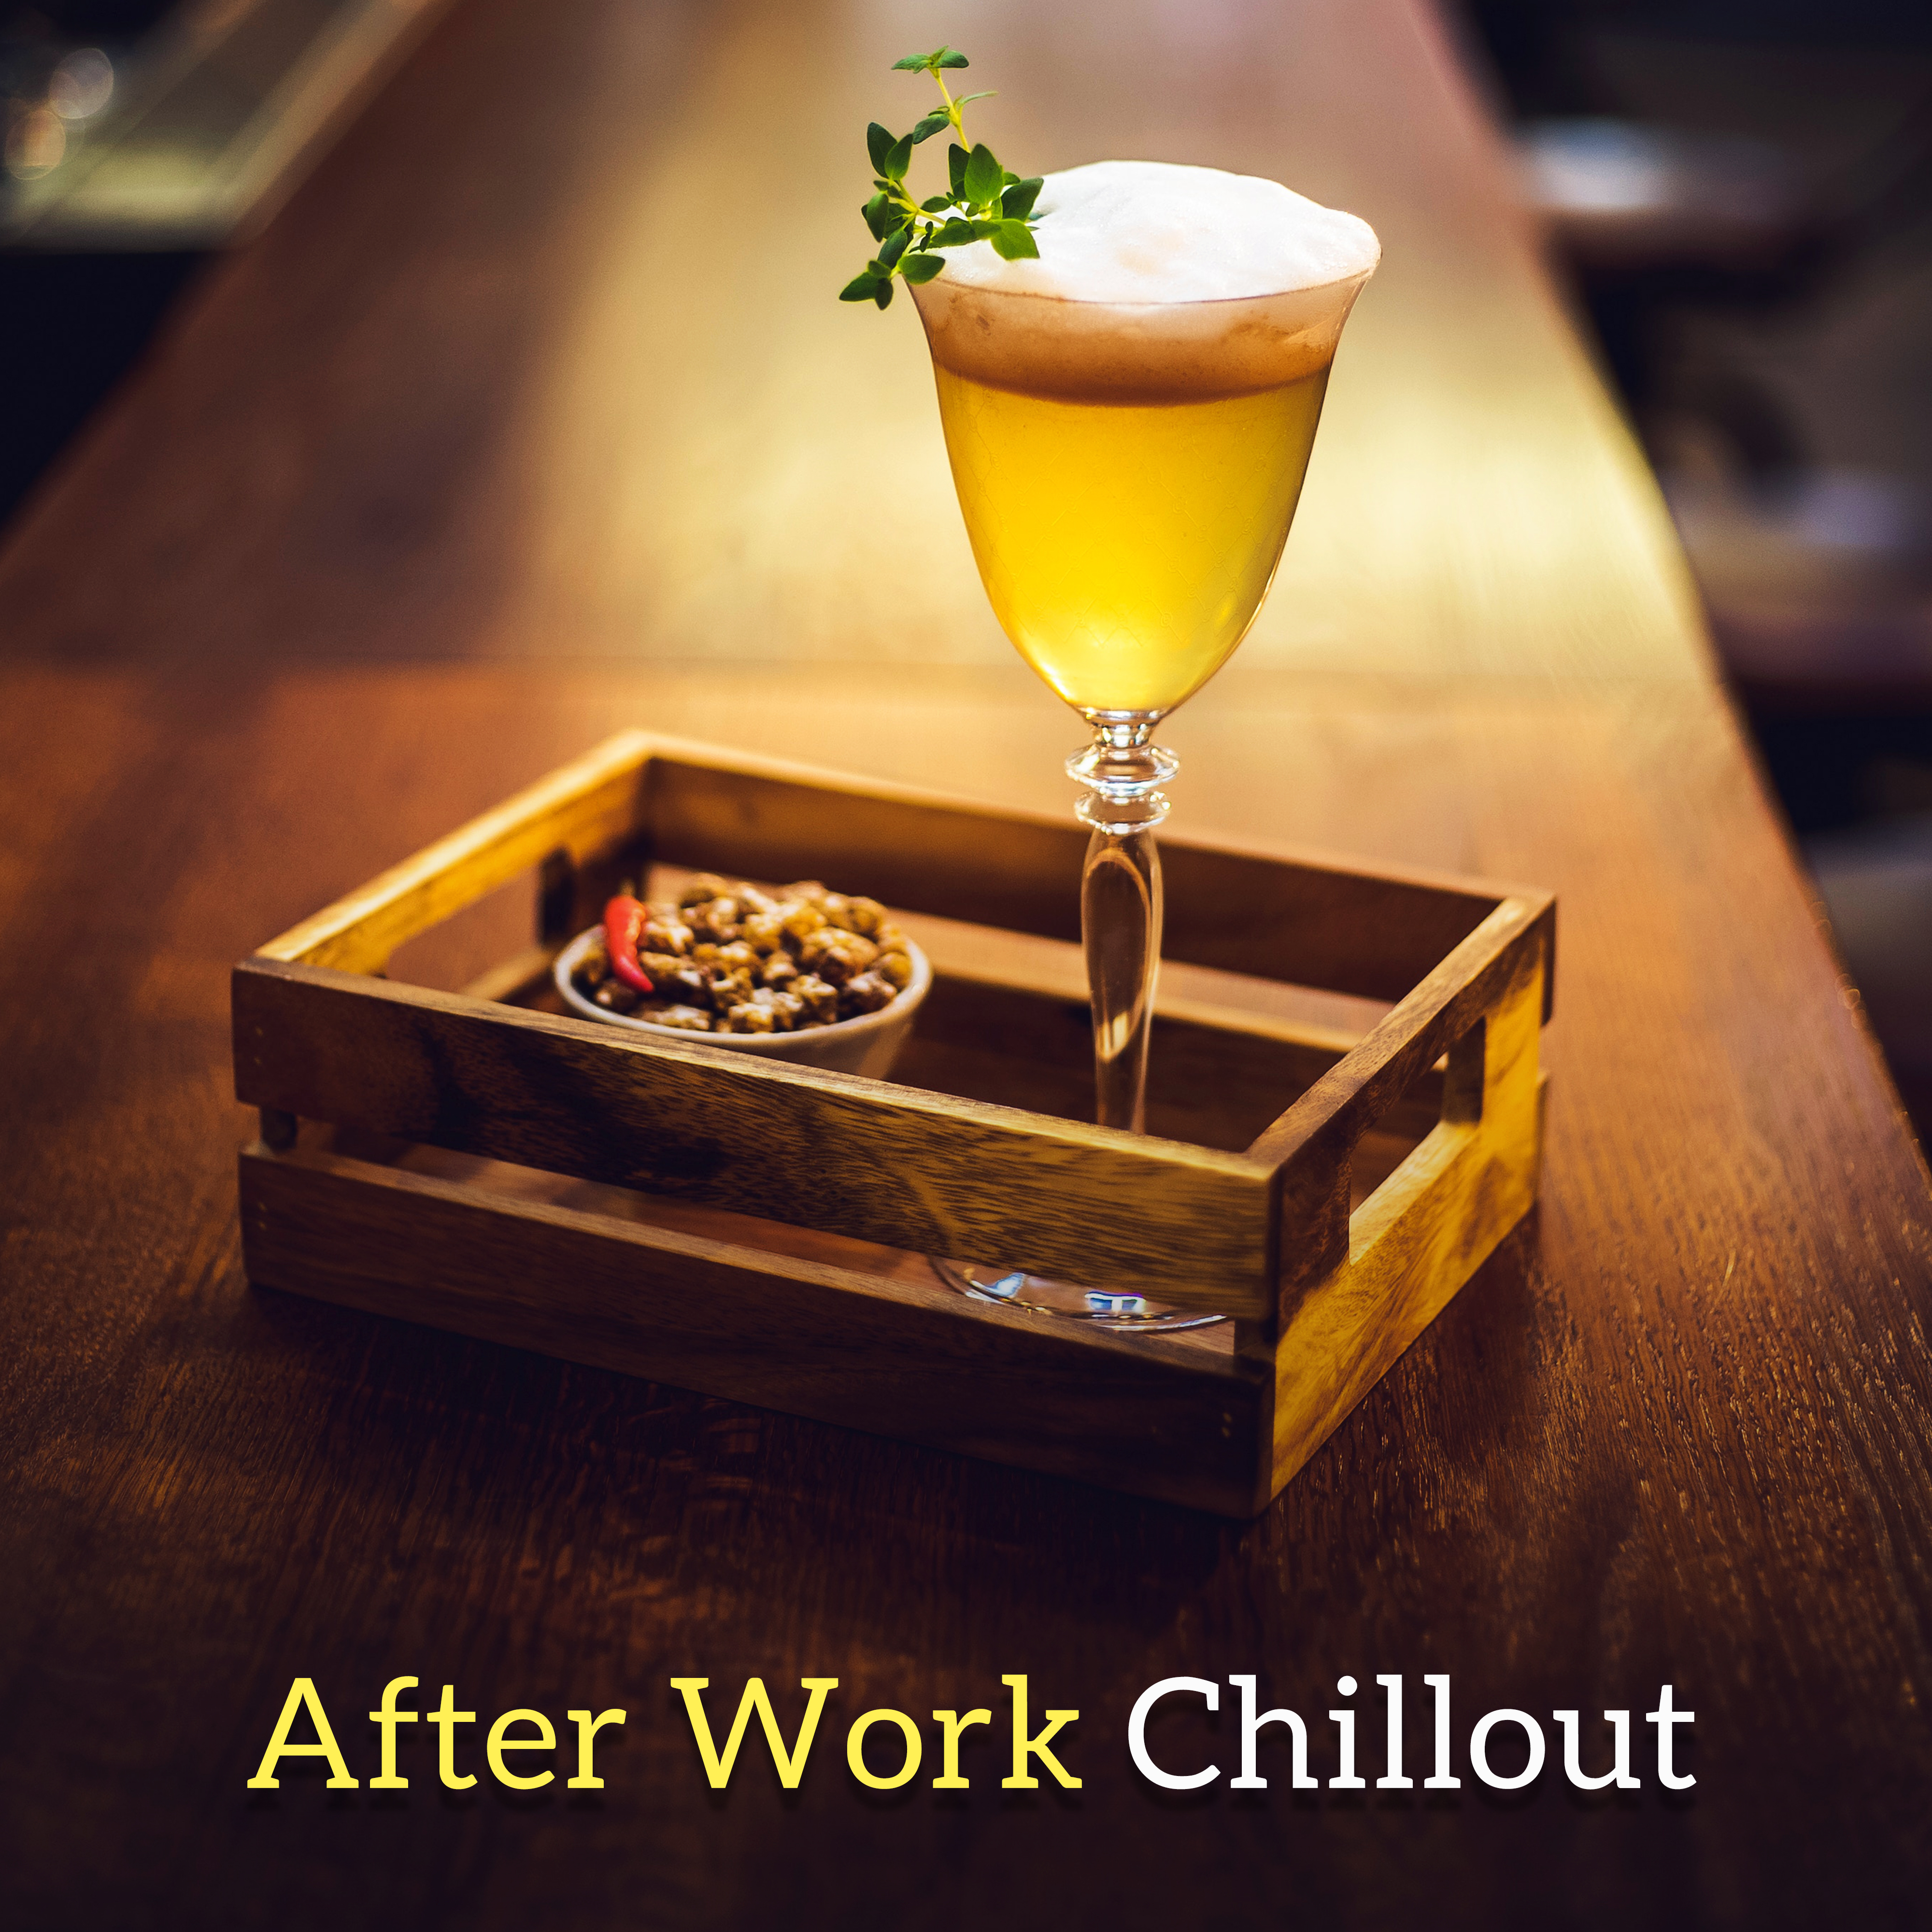 After Work Chillout – Best of Chill Out Music, Relax After Work, Lazy Afternoon, Relief Stress, Rest